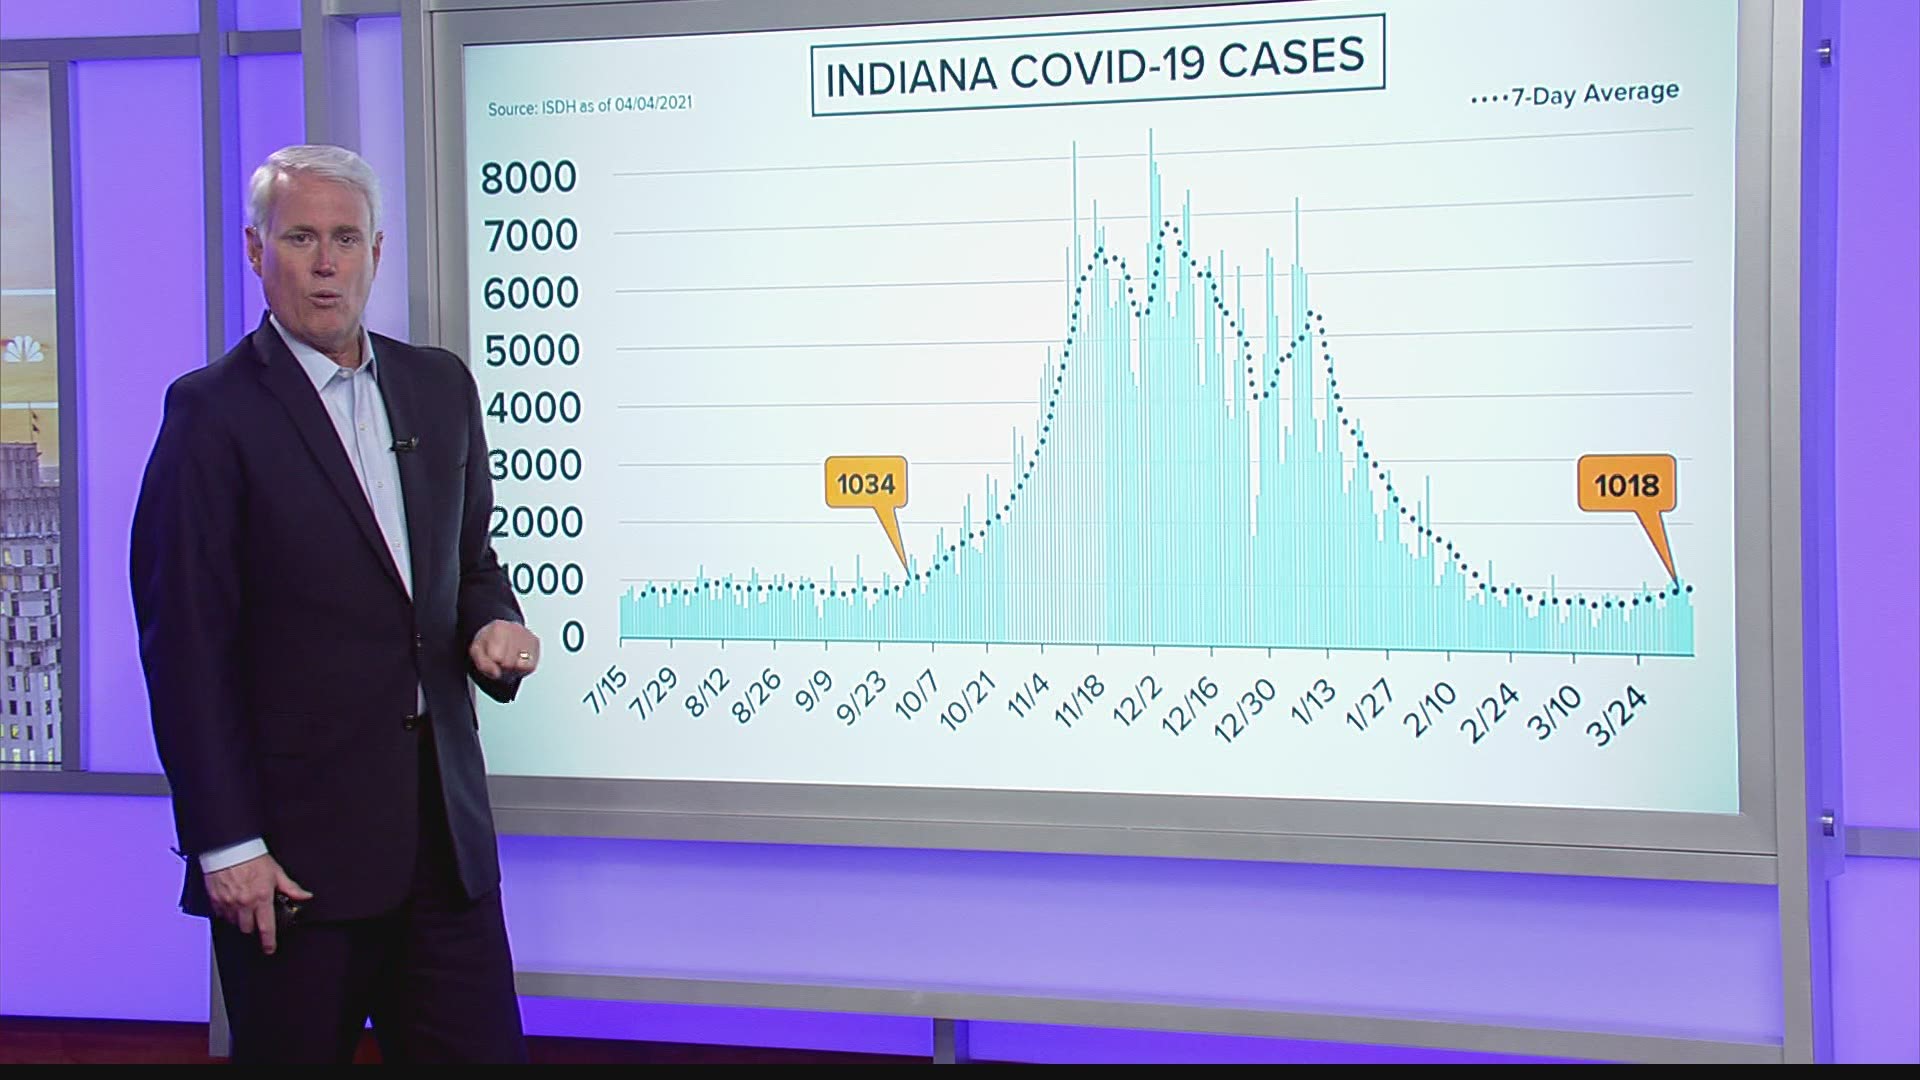 Right now, cases are starting to inch up.. with the average now above a thousand cases a day.